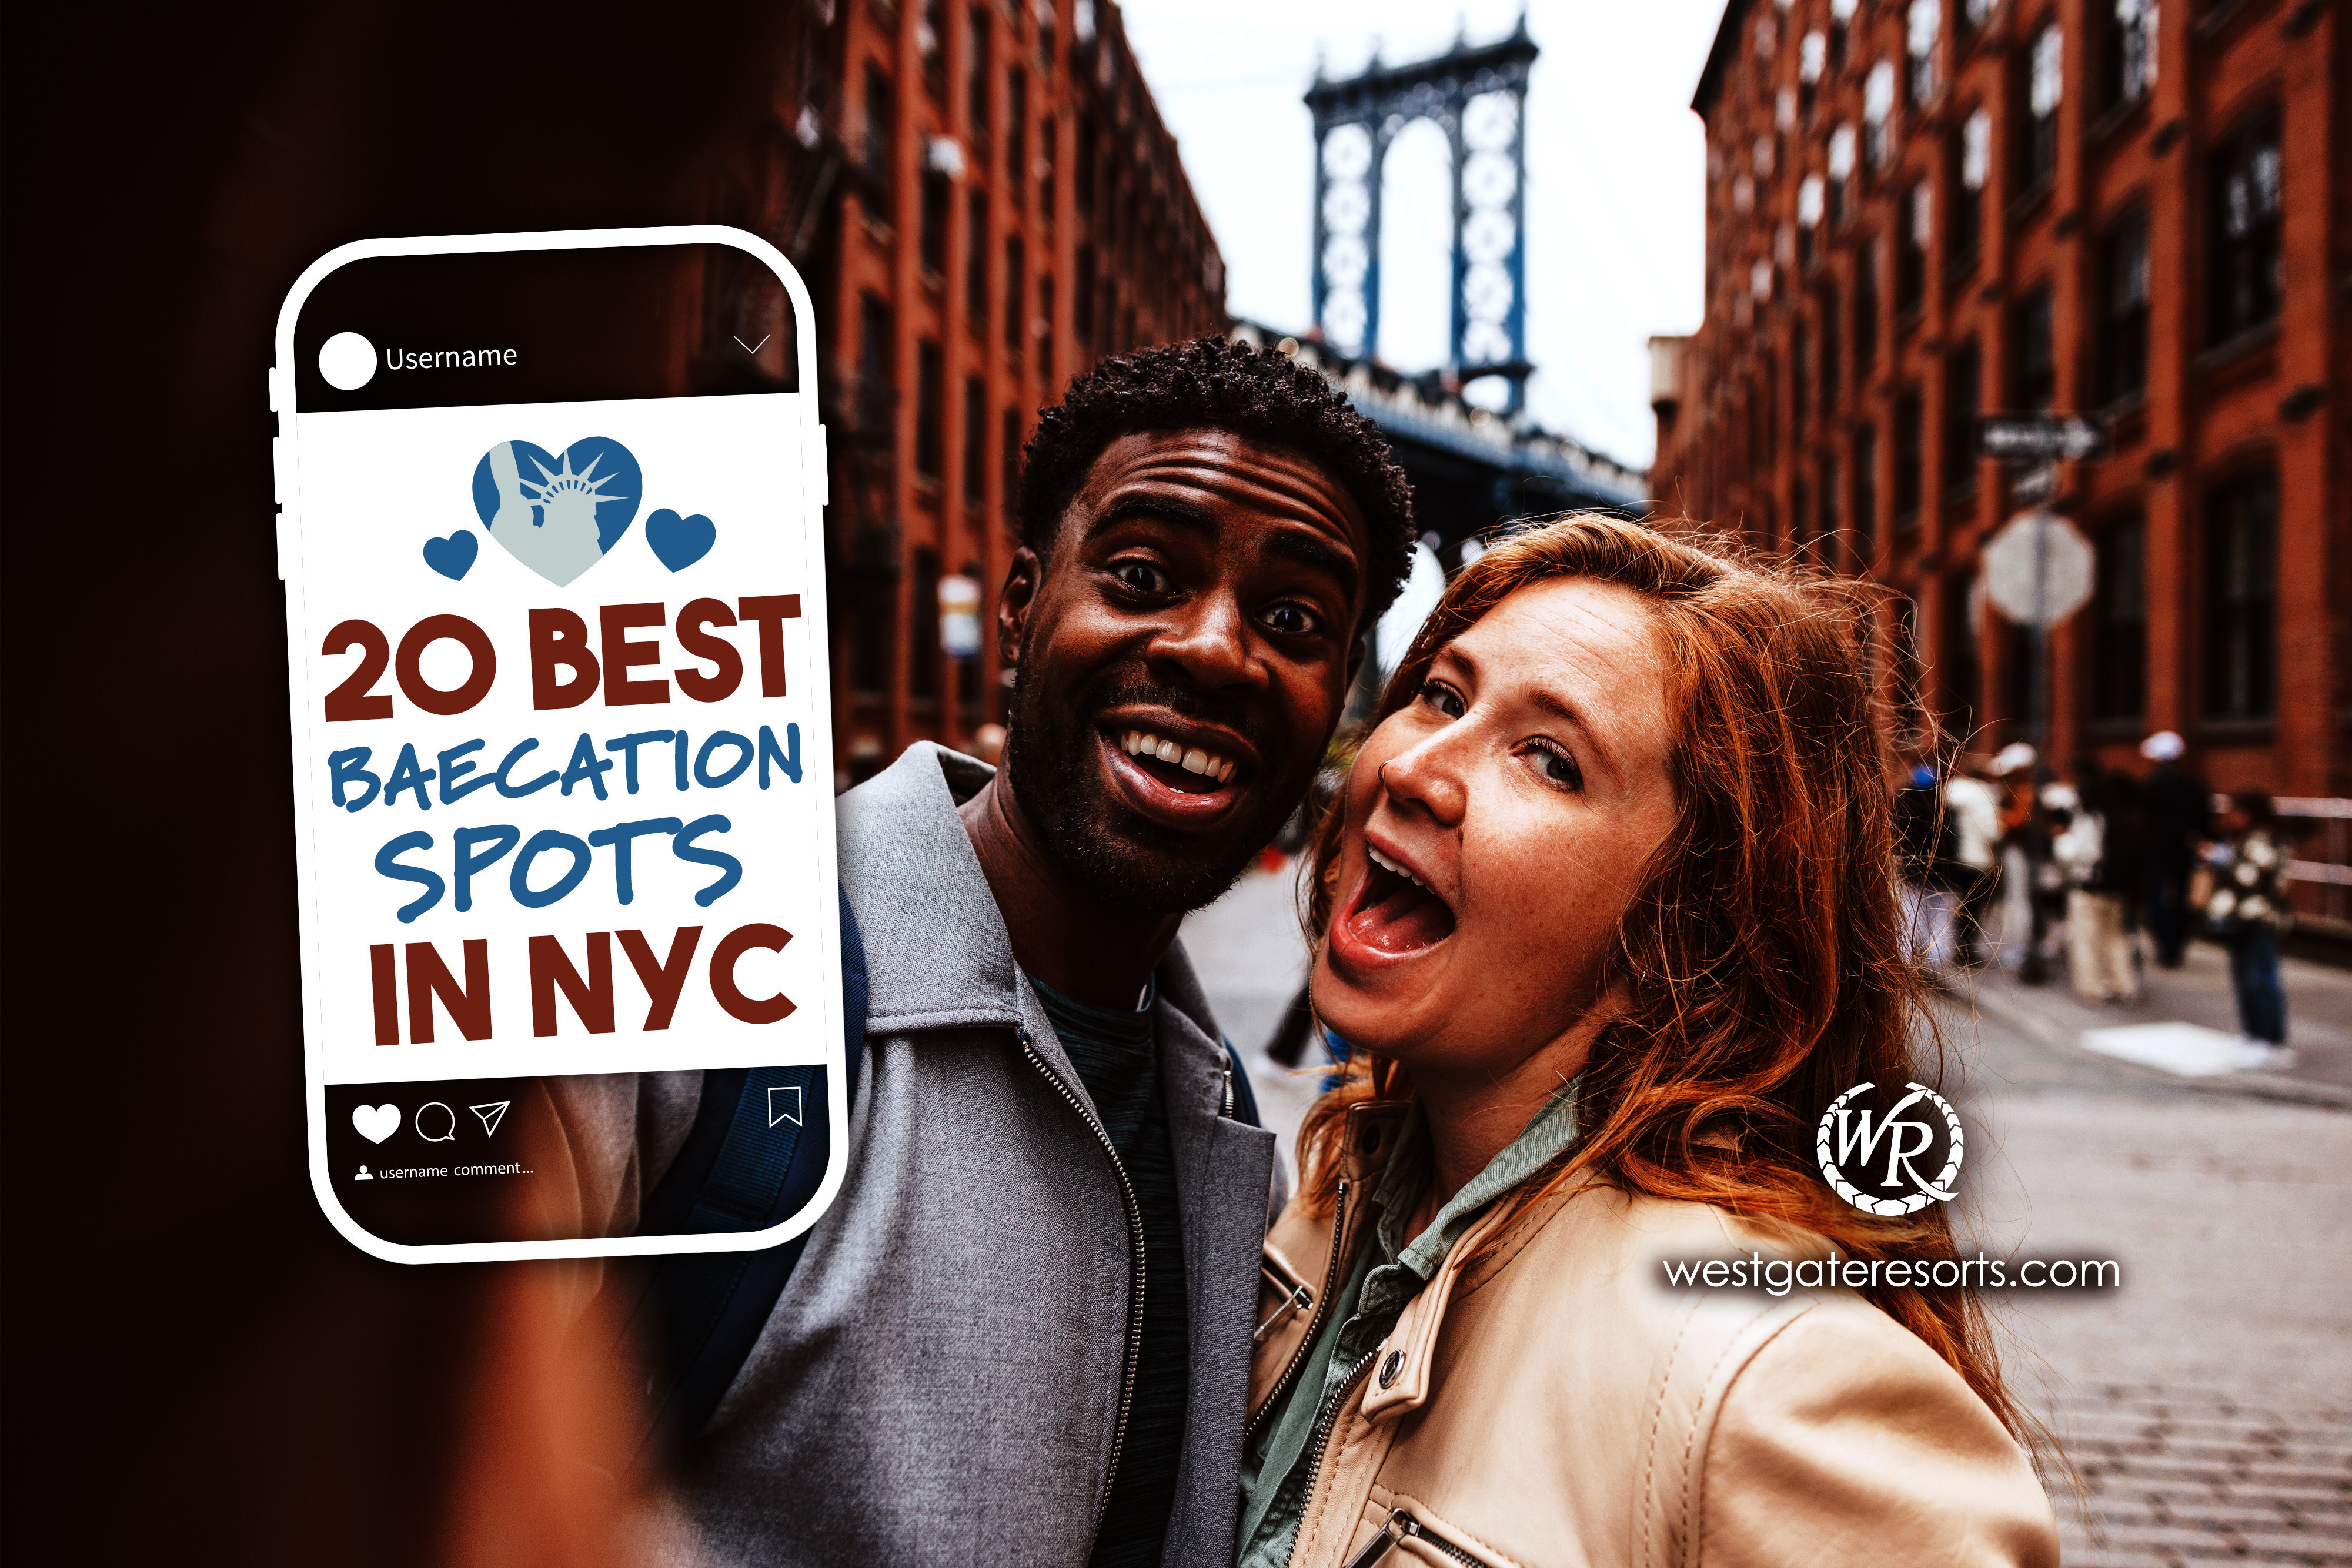 The 20 Best Baecation Spots in NYC to Visit This Weekend 